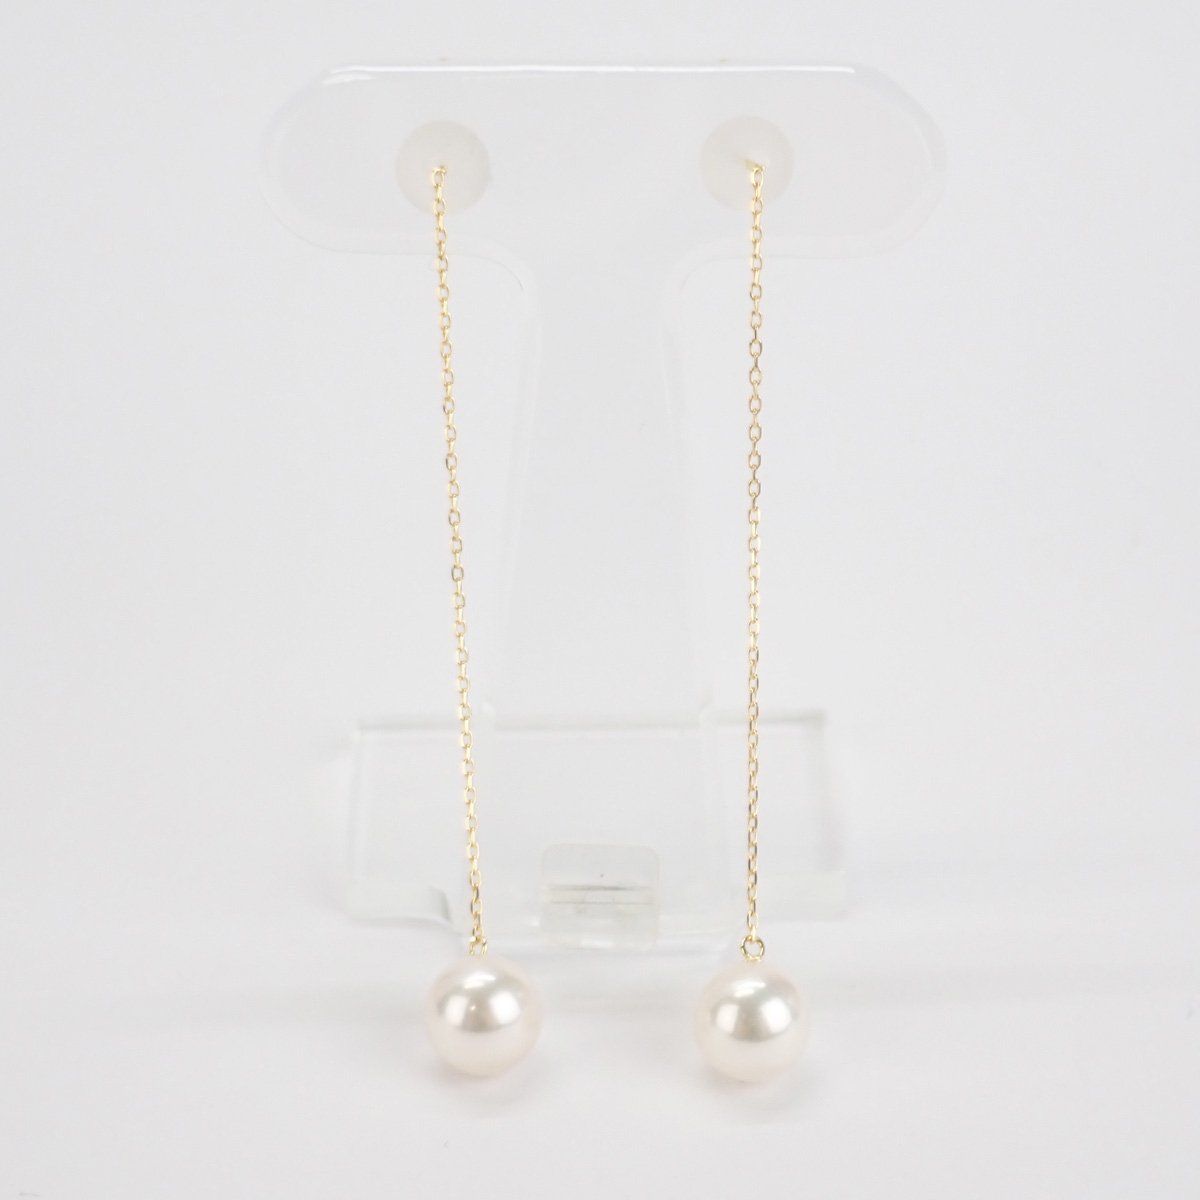 K18YG Women's Design Earrings with 7.5mm Akoya Pearl, White, Never-Used Pre-Owned Item